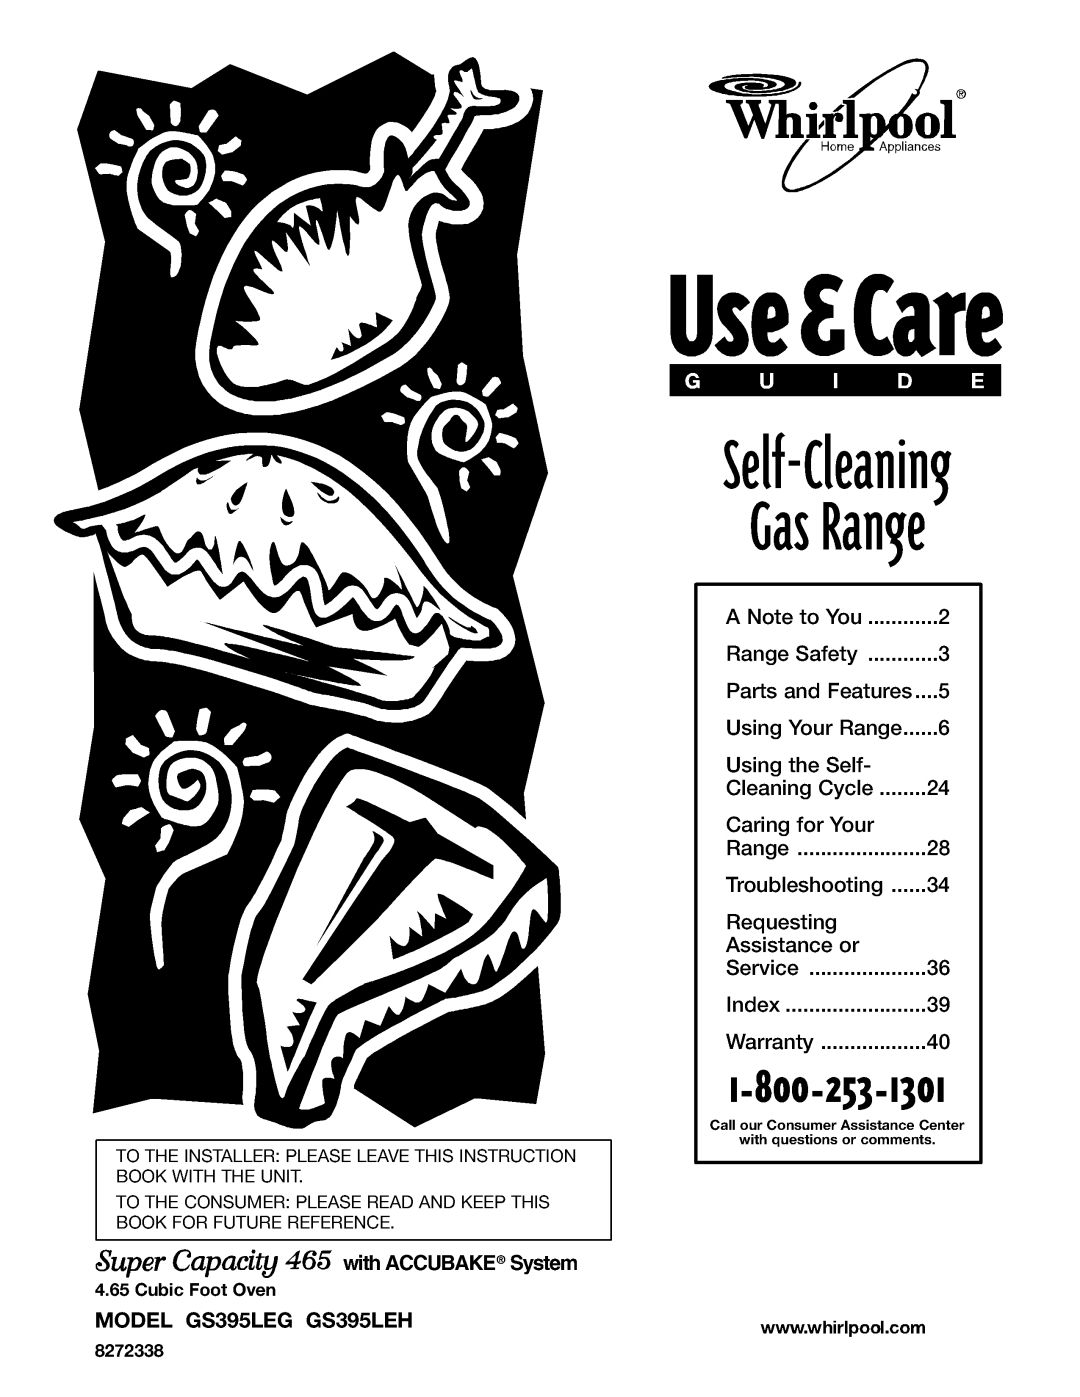 Whirlpool GS395LEG warranty 1-800-253-1301, Gas Range, Self-Cleaning, with ACCUBAKE System 